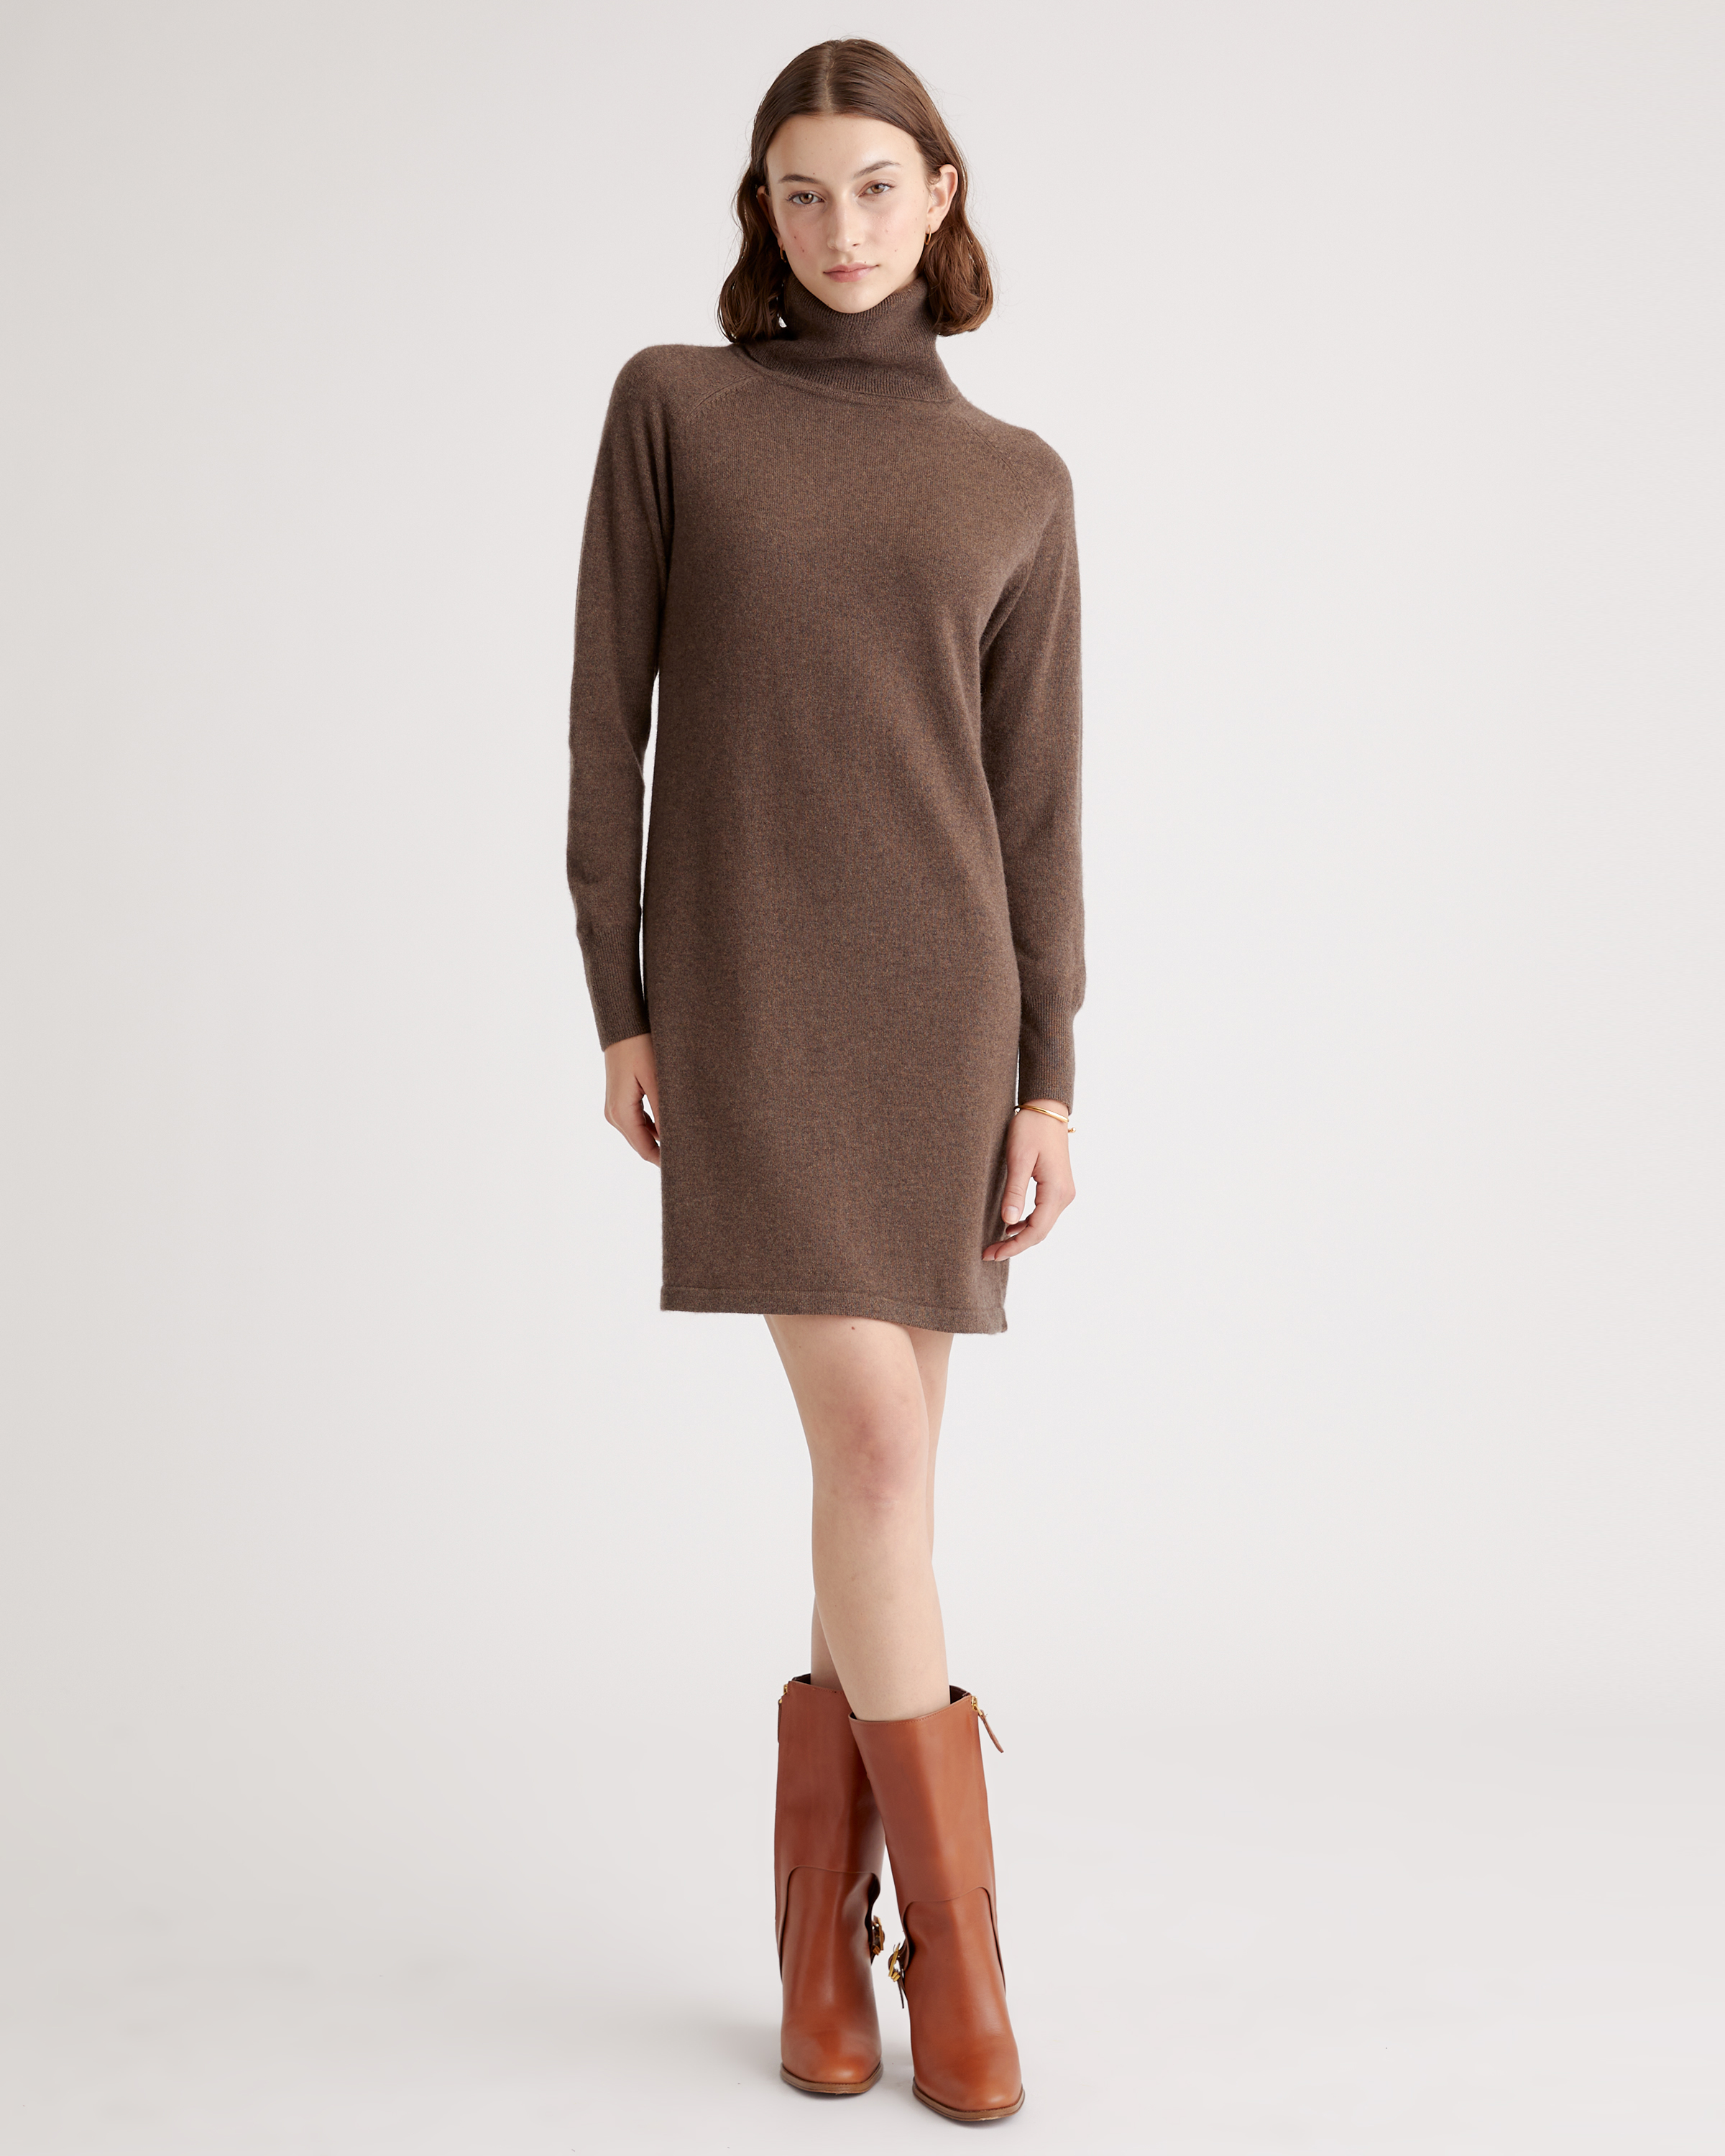 Women's Grey Knit Sweater Dress, Burgundy Leather Ankle Boots